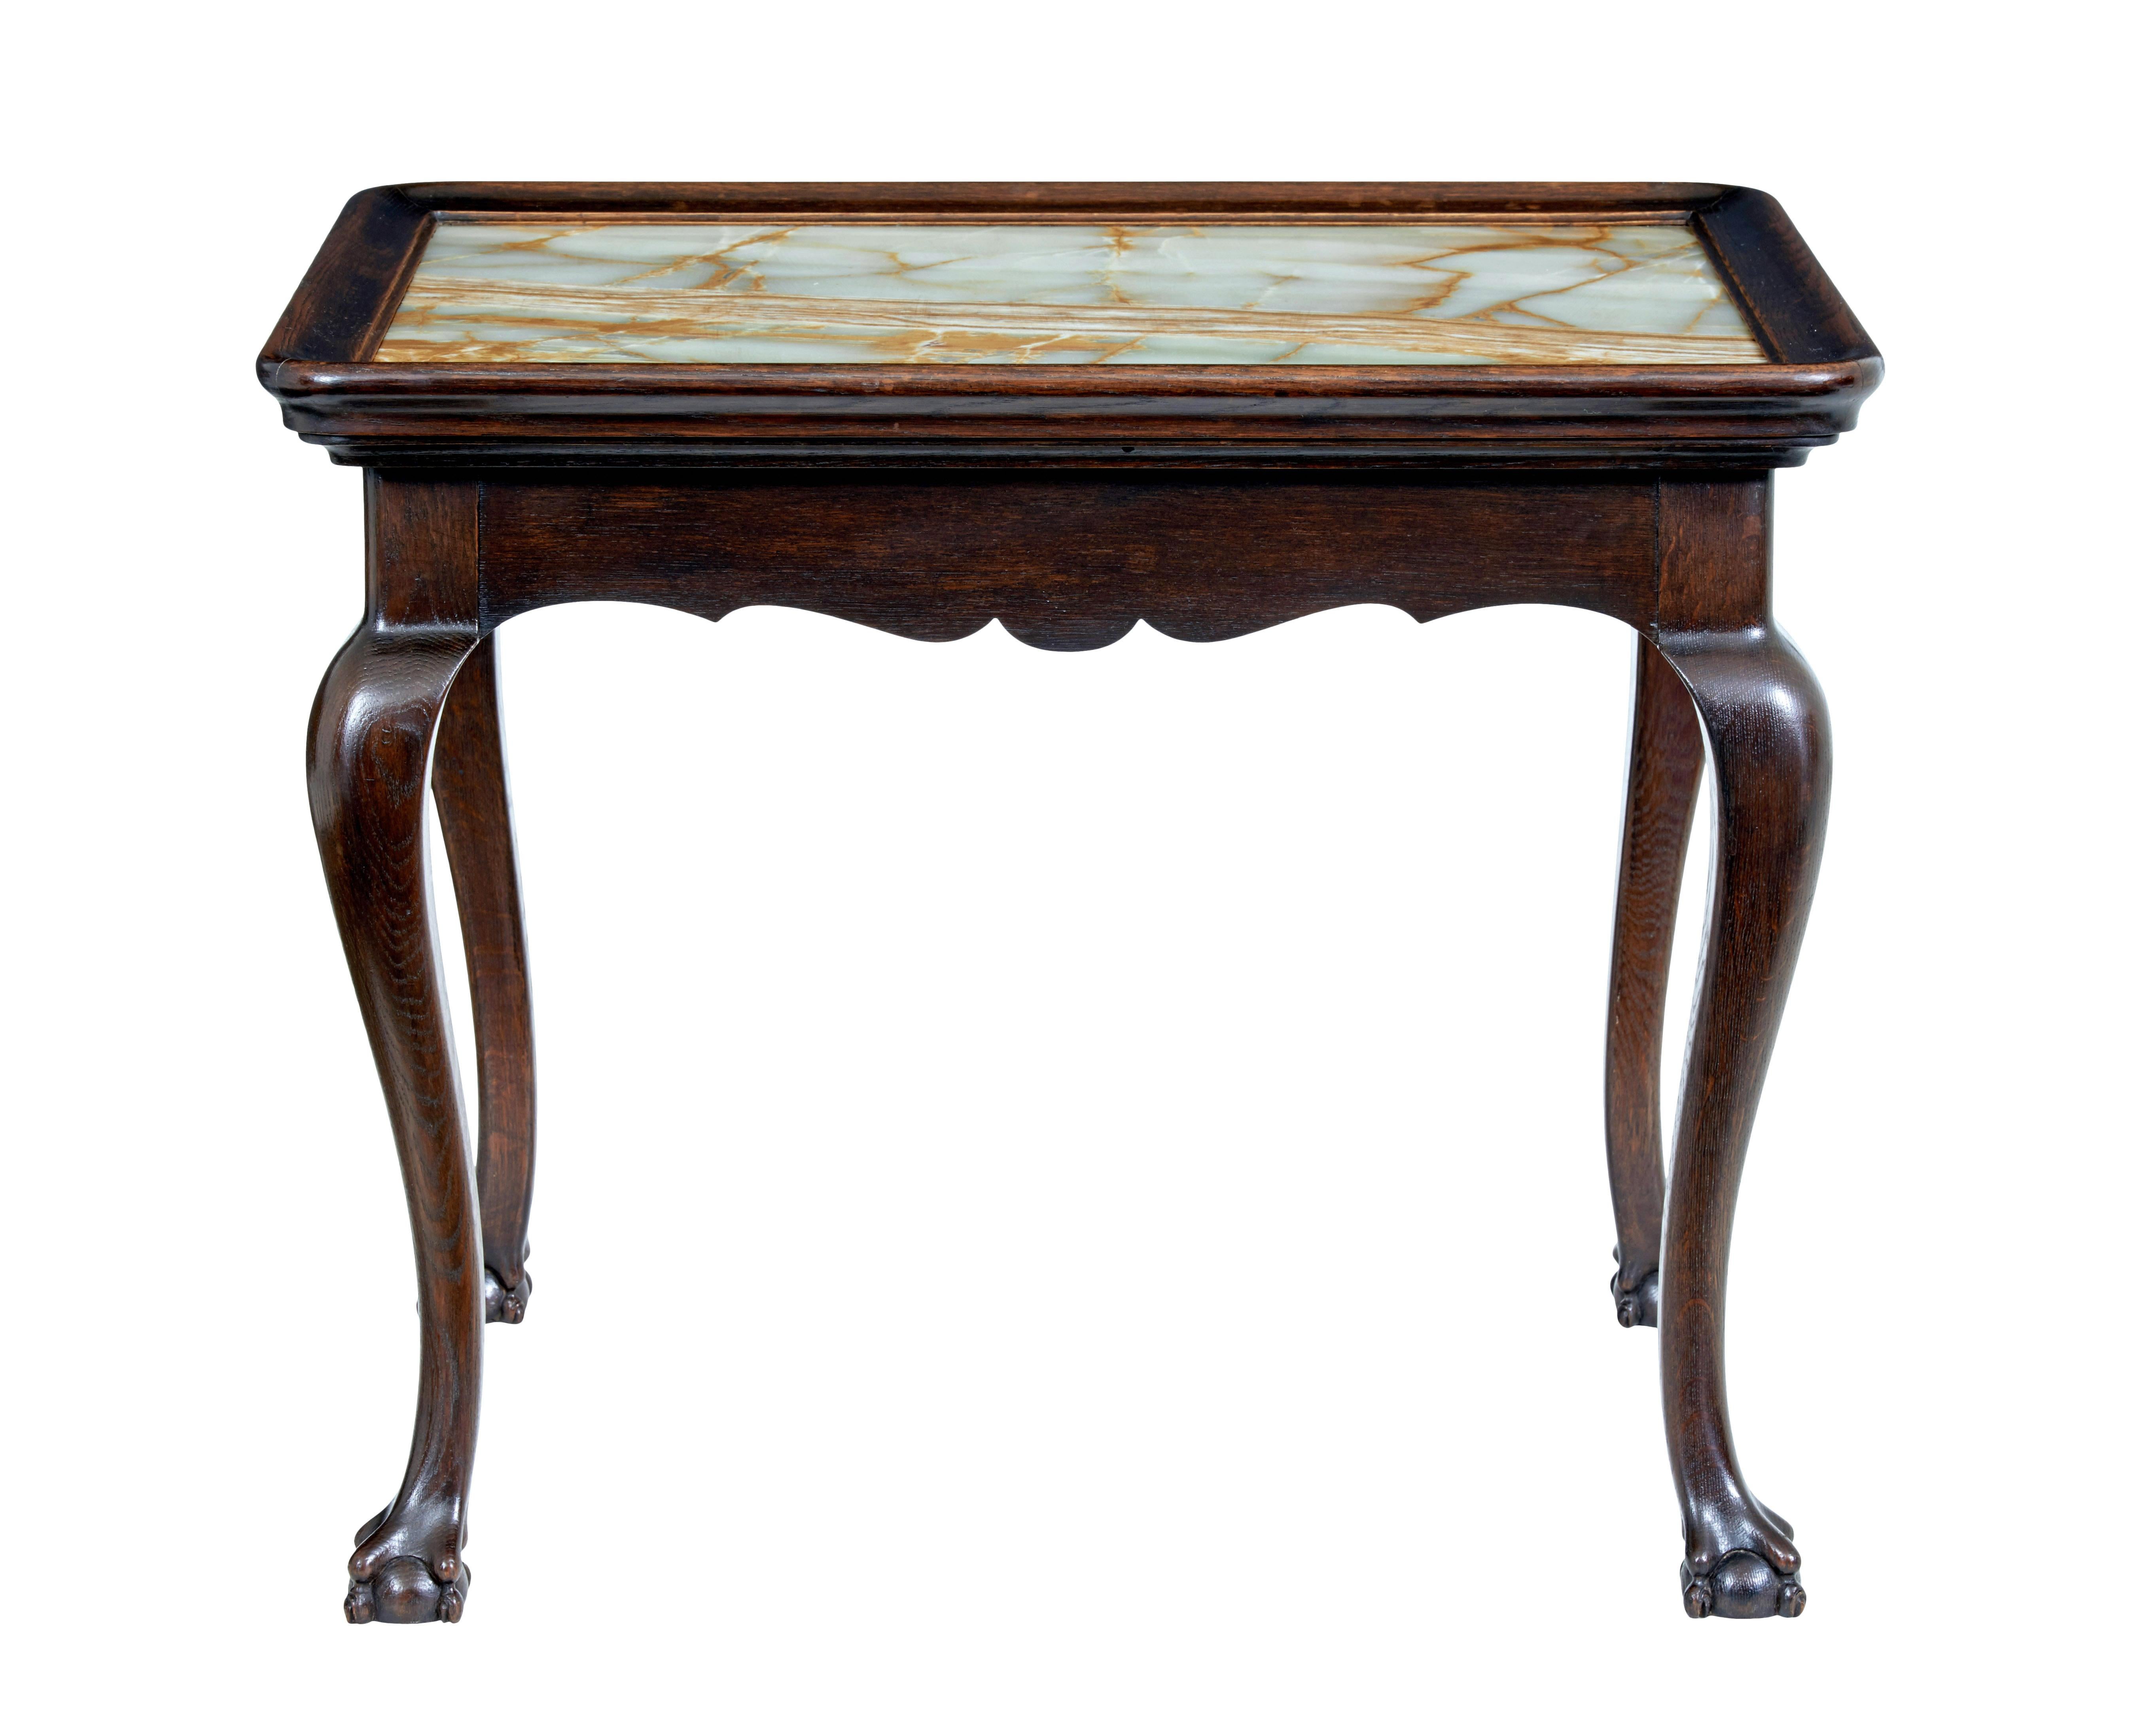 19th Century oak chippendale influenced onyx top table In Good Condition For Sale In Debenham, Suffolk